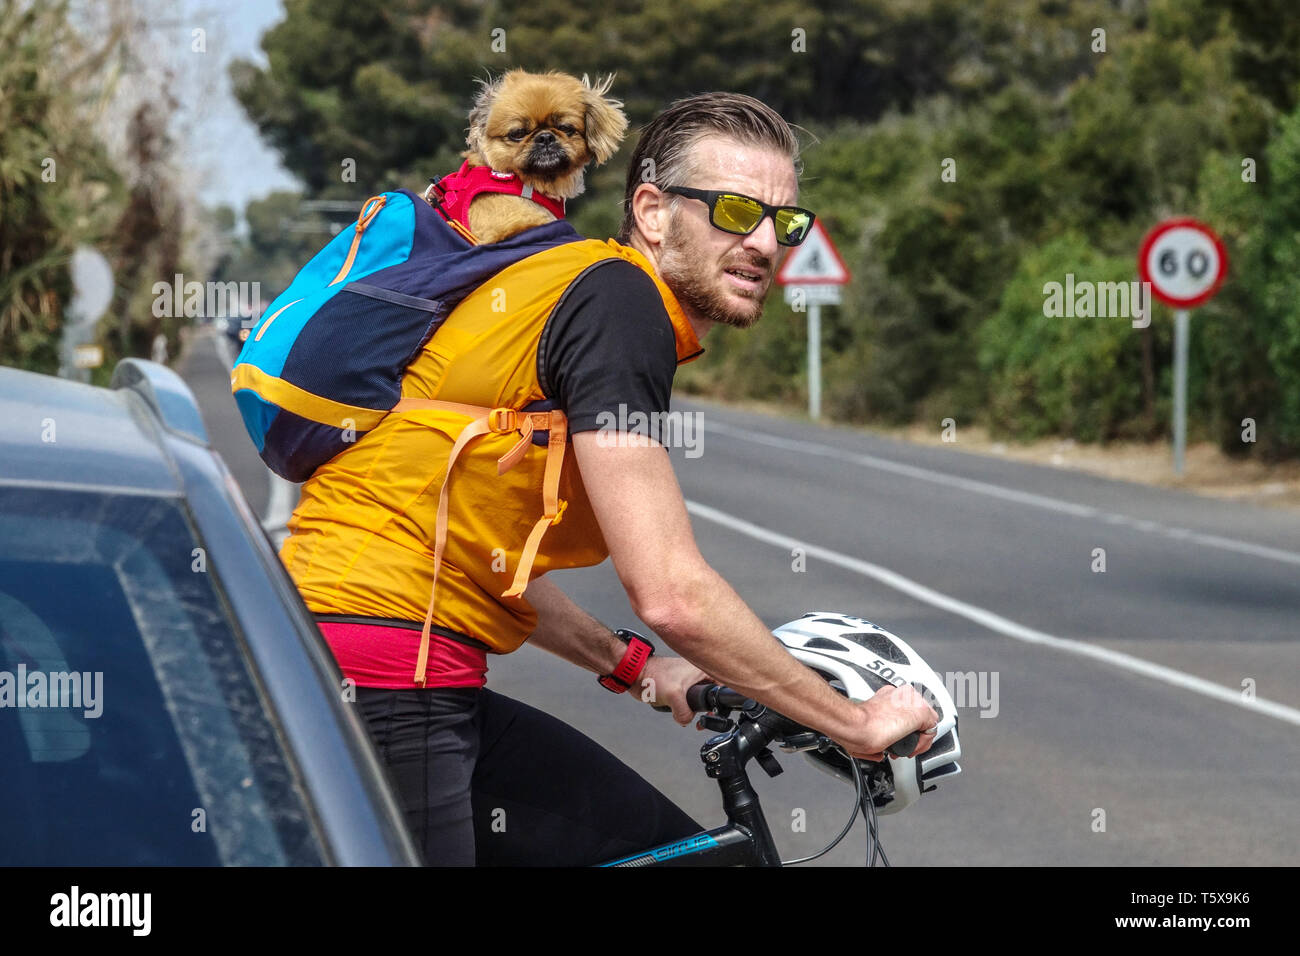 Spanish man cycling with a dog in his backpack Spain bicycle man and dog in suit bag biking without helmet riding bike Stock Photo